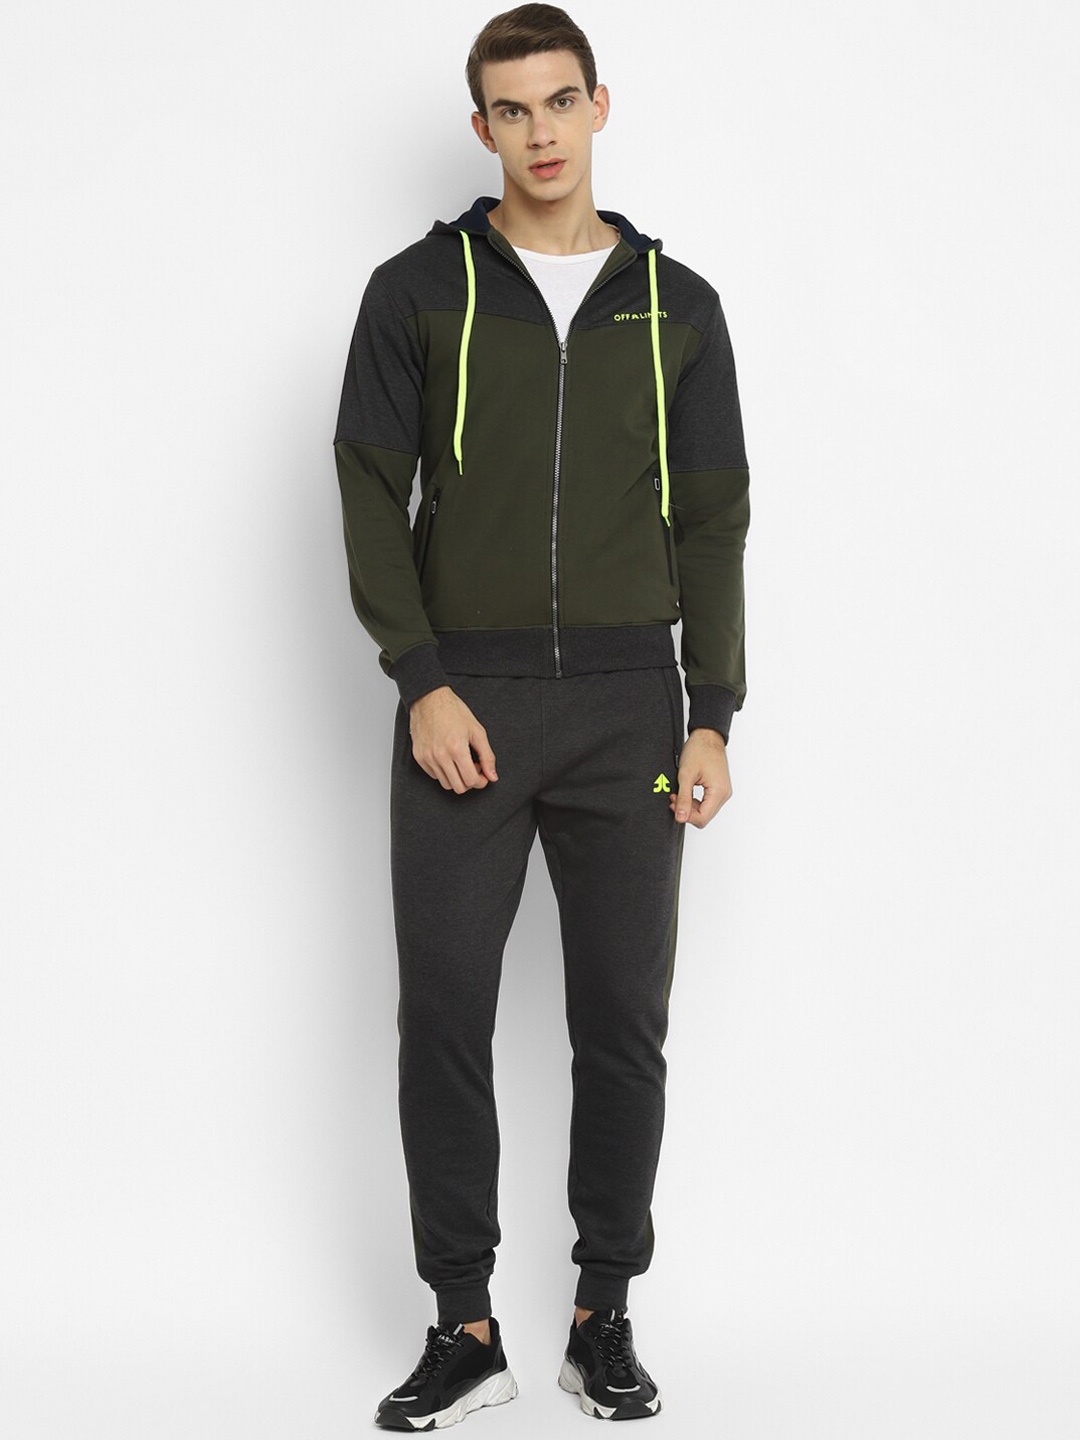 Buy OFF LIMITS Men Olive Green & Black Solid Tracksuits - Tracksuits ...